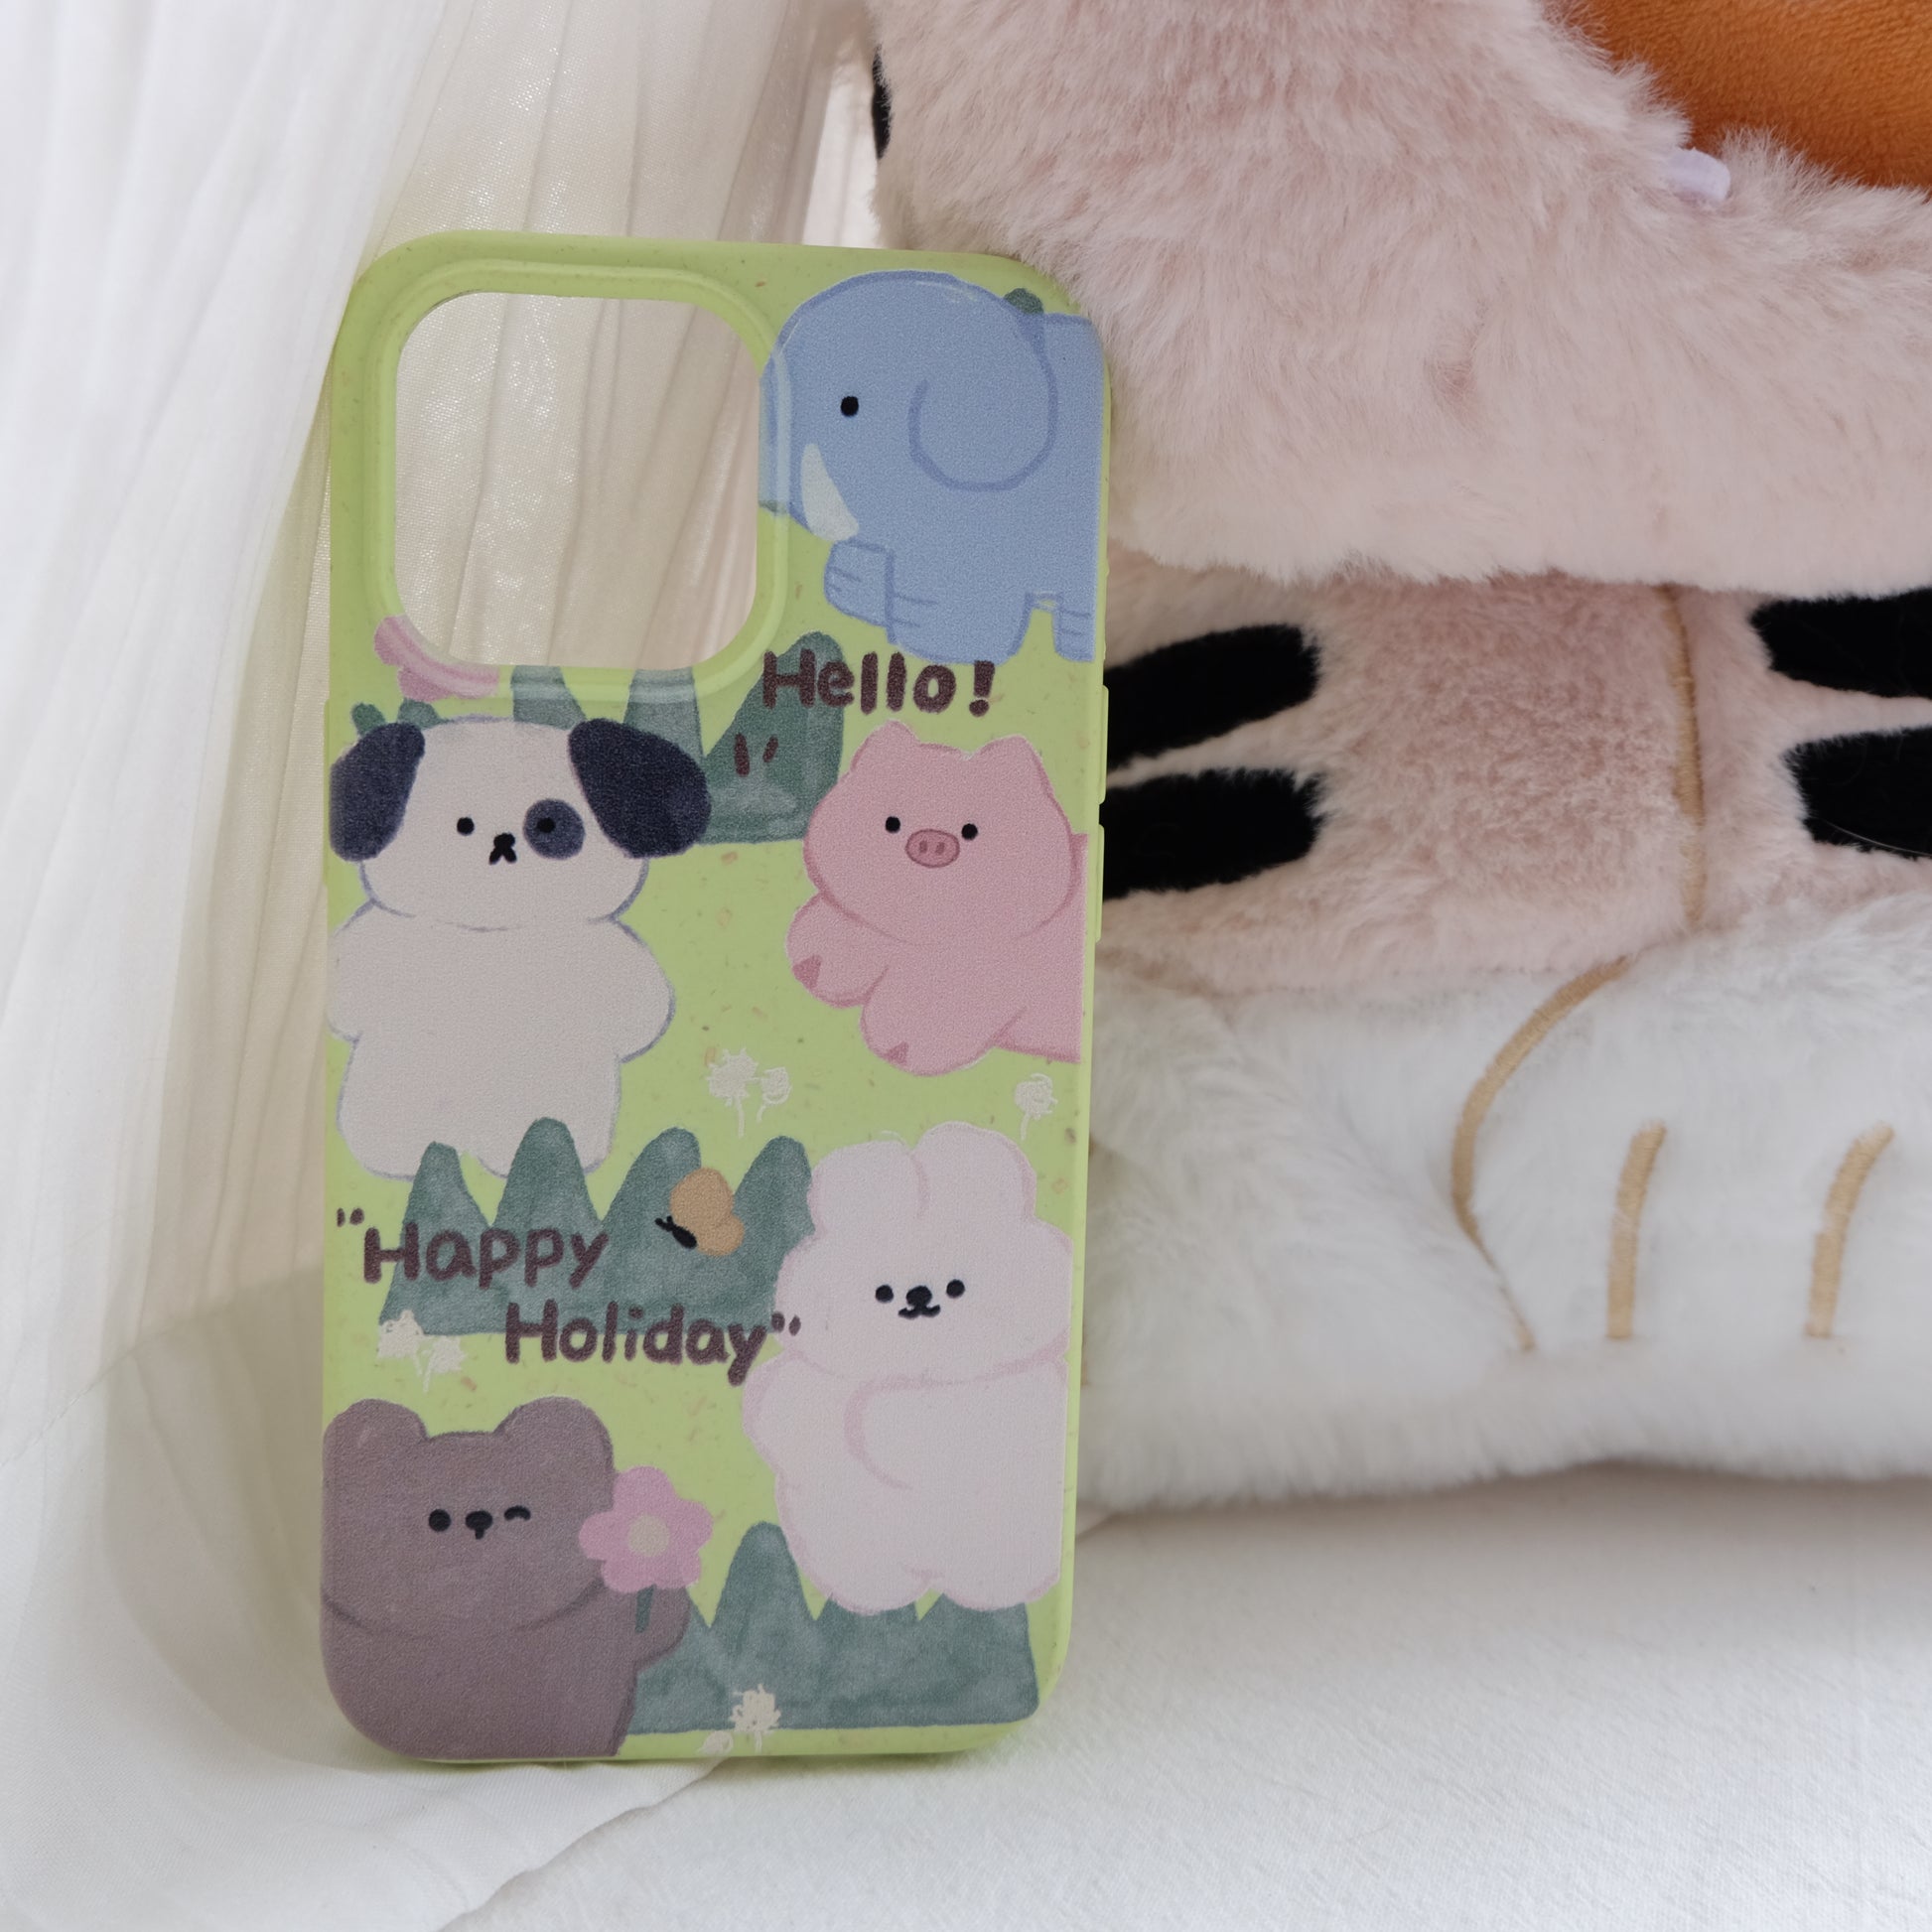 Happy holiday my friends degradable phone case | phone accessories | Three Fleas